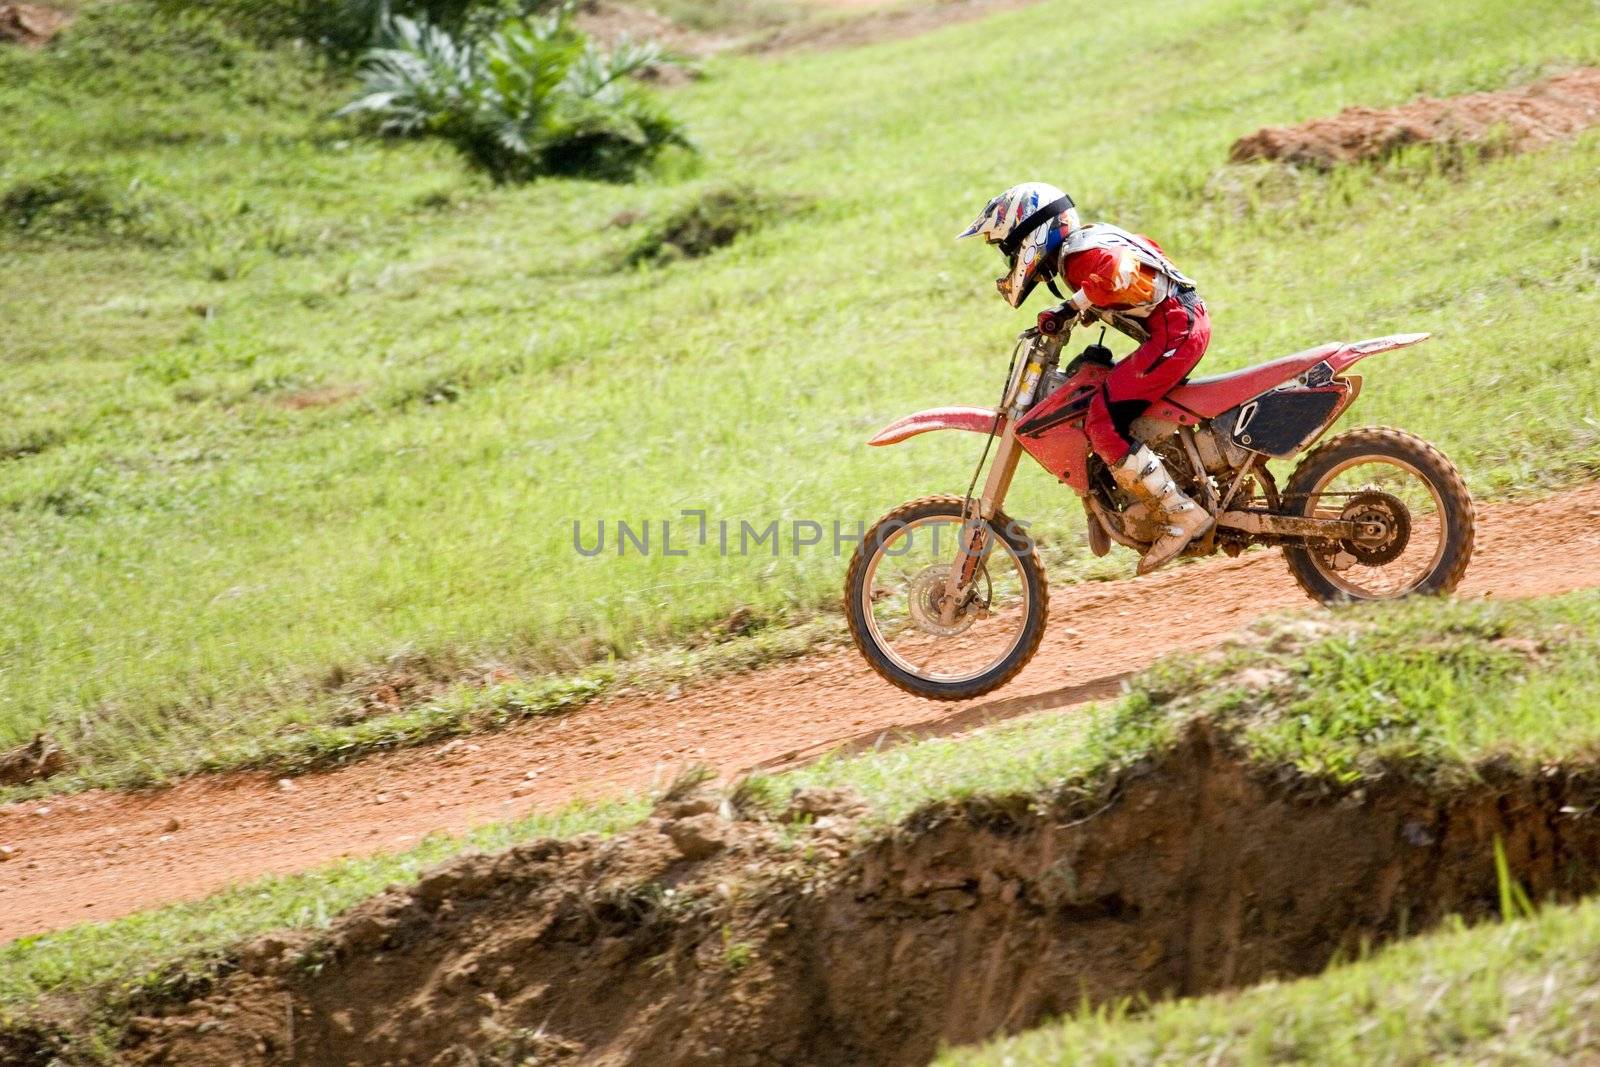 Image of a motocross participant in action.